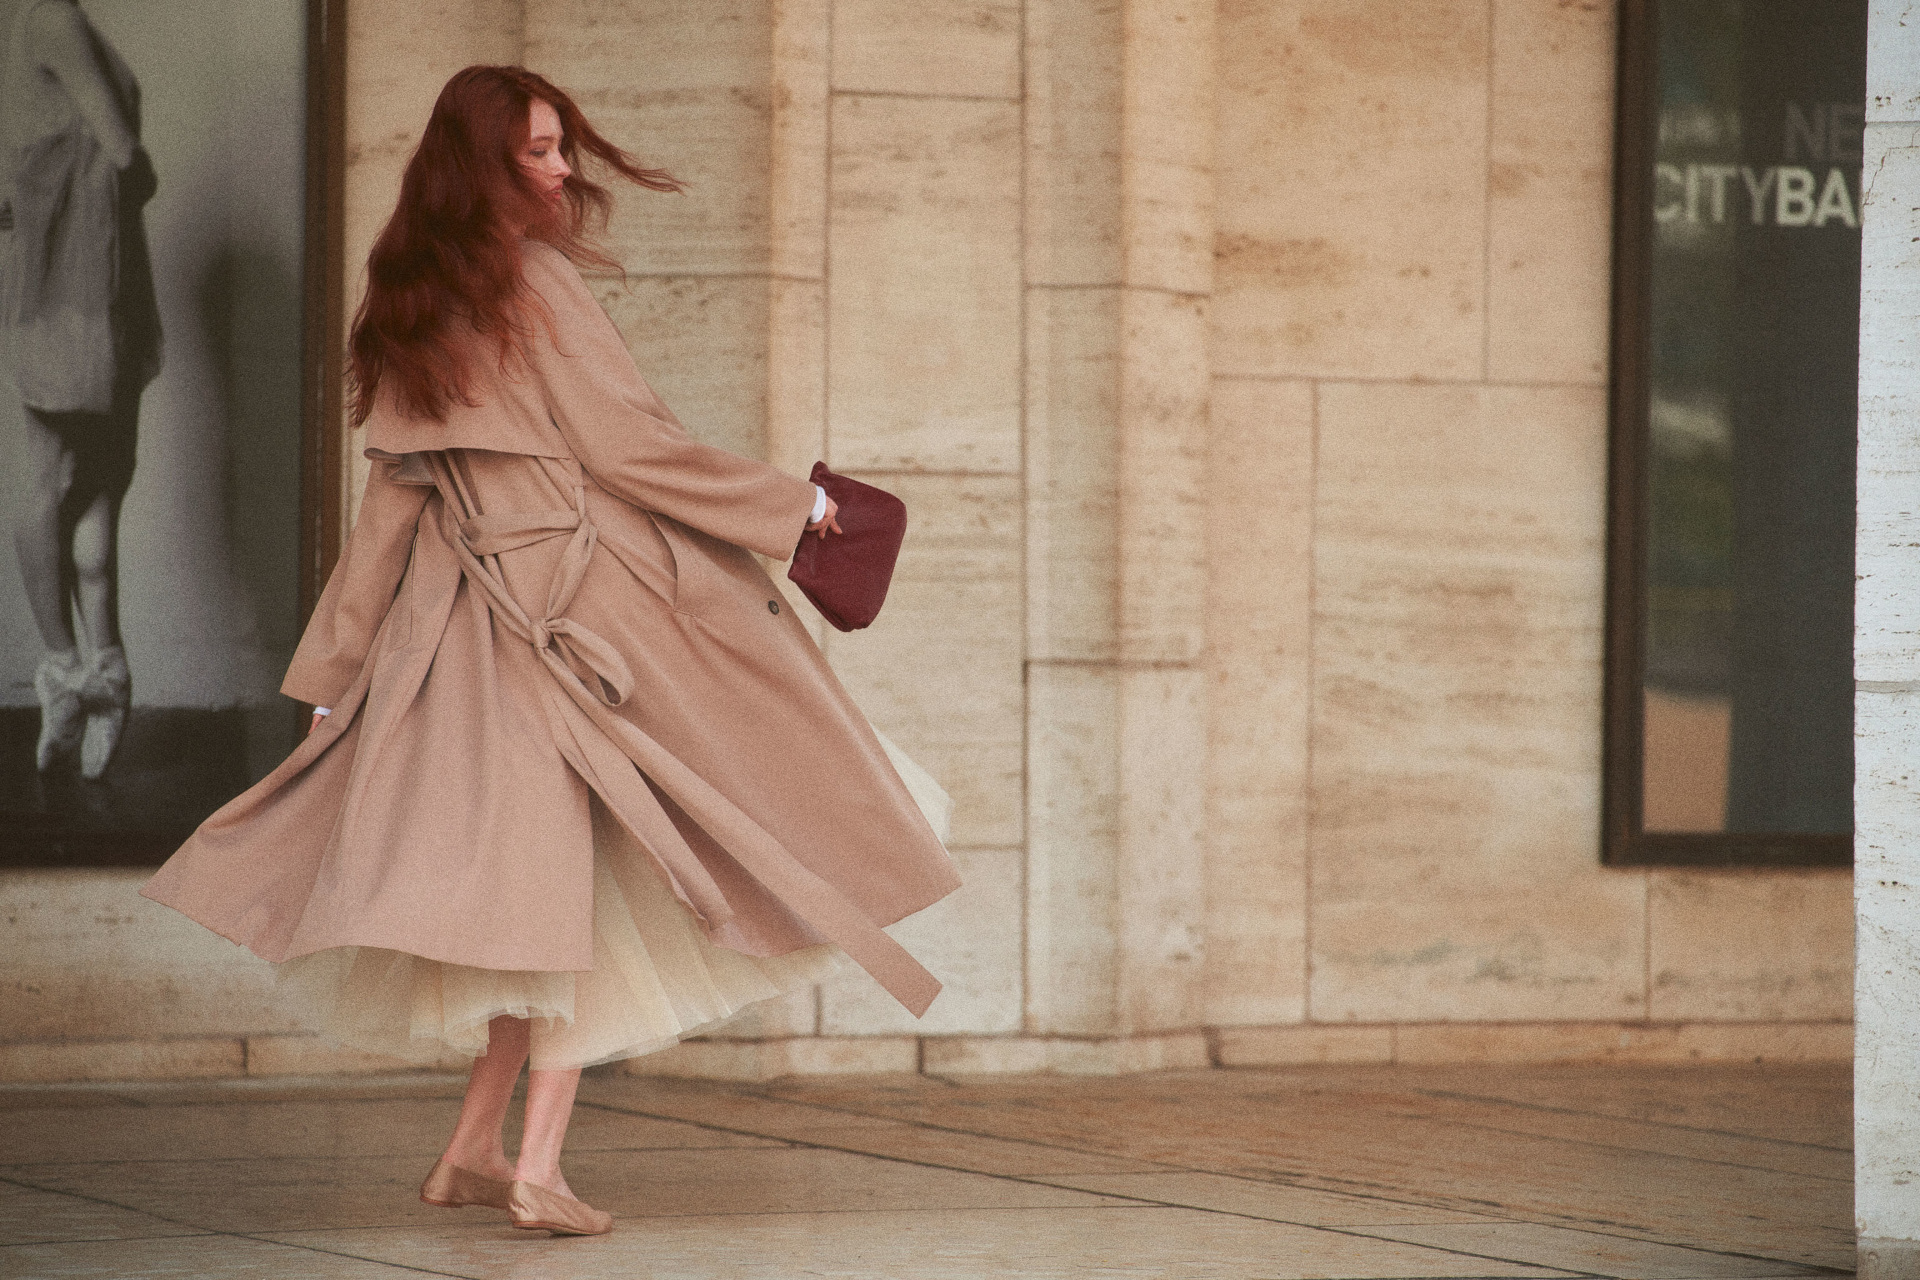 Woman twirling around on street in trench coat and tulle skirt